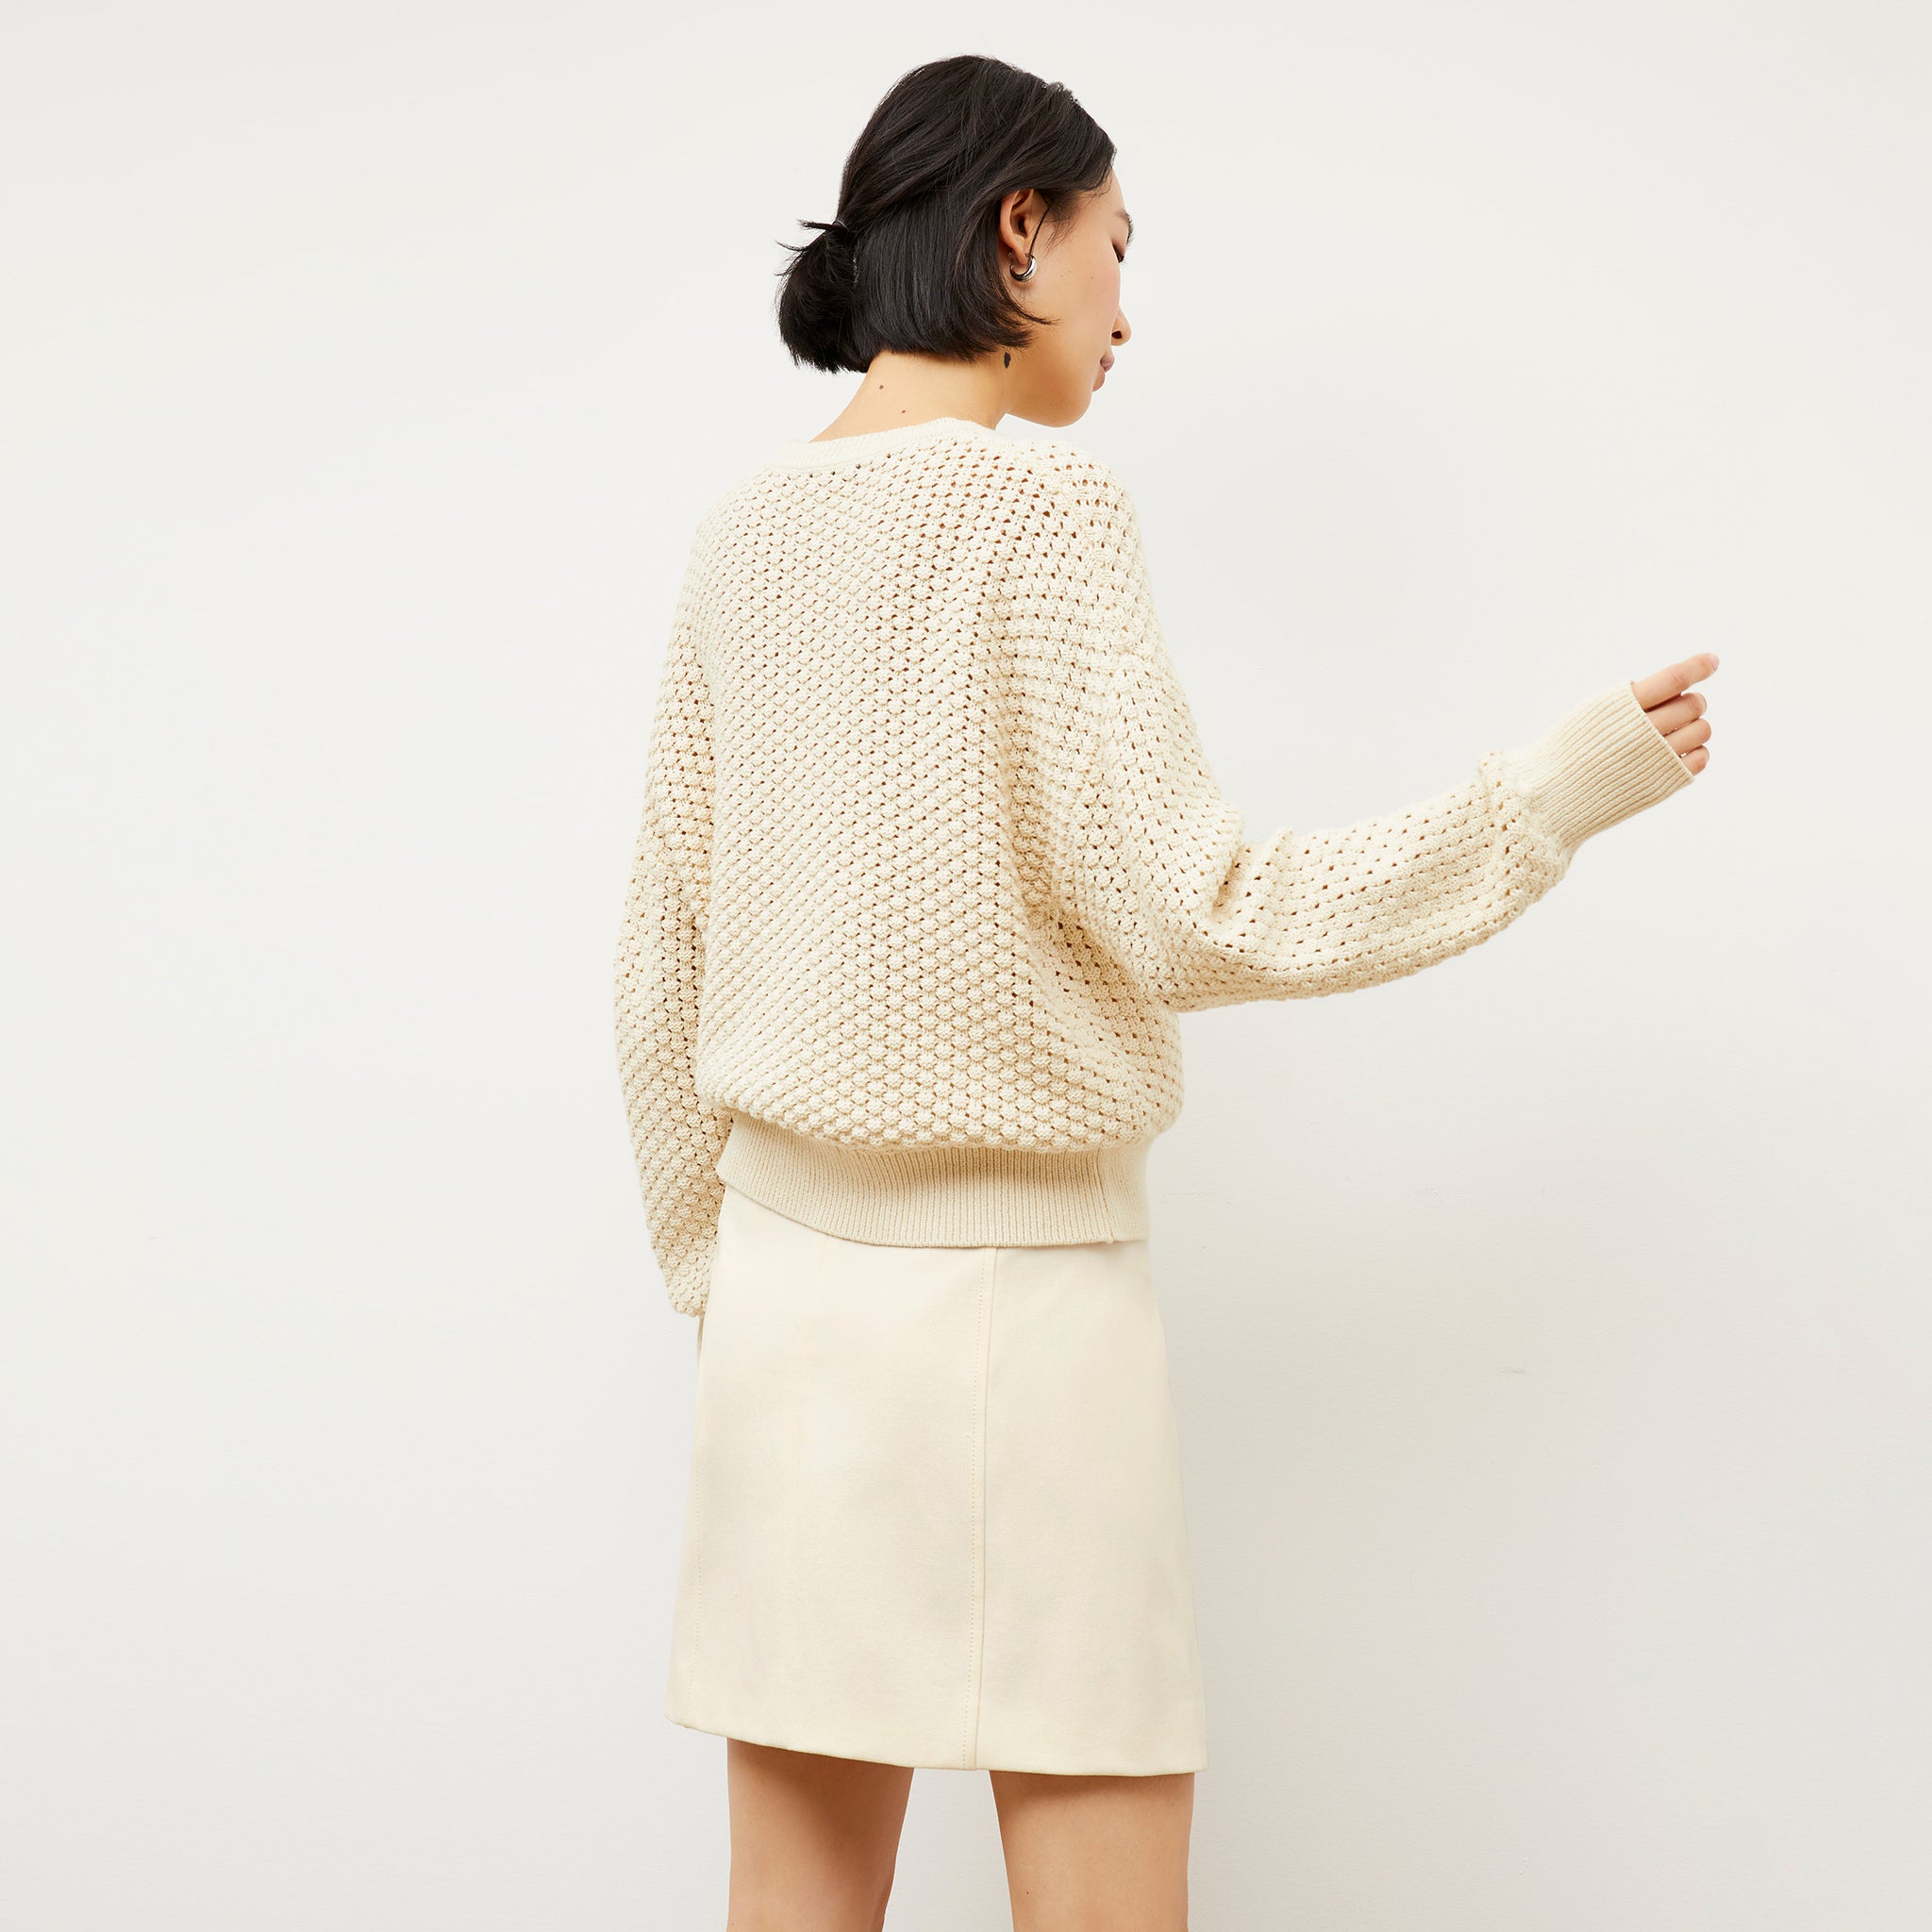 Packshot image of the Liam sweater popcorn knit in coconut